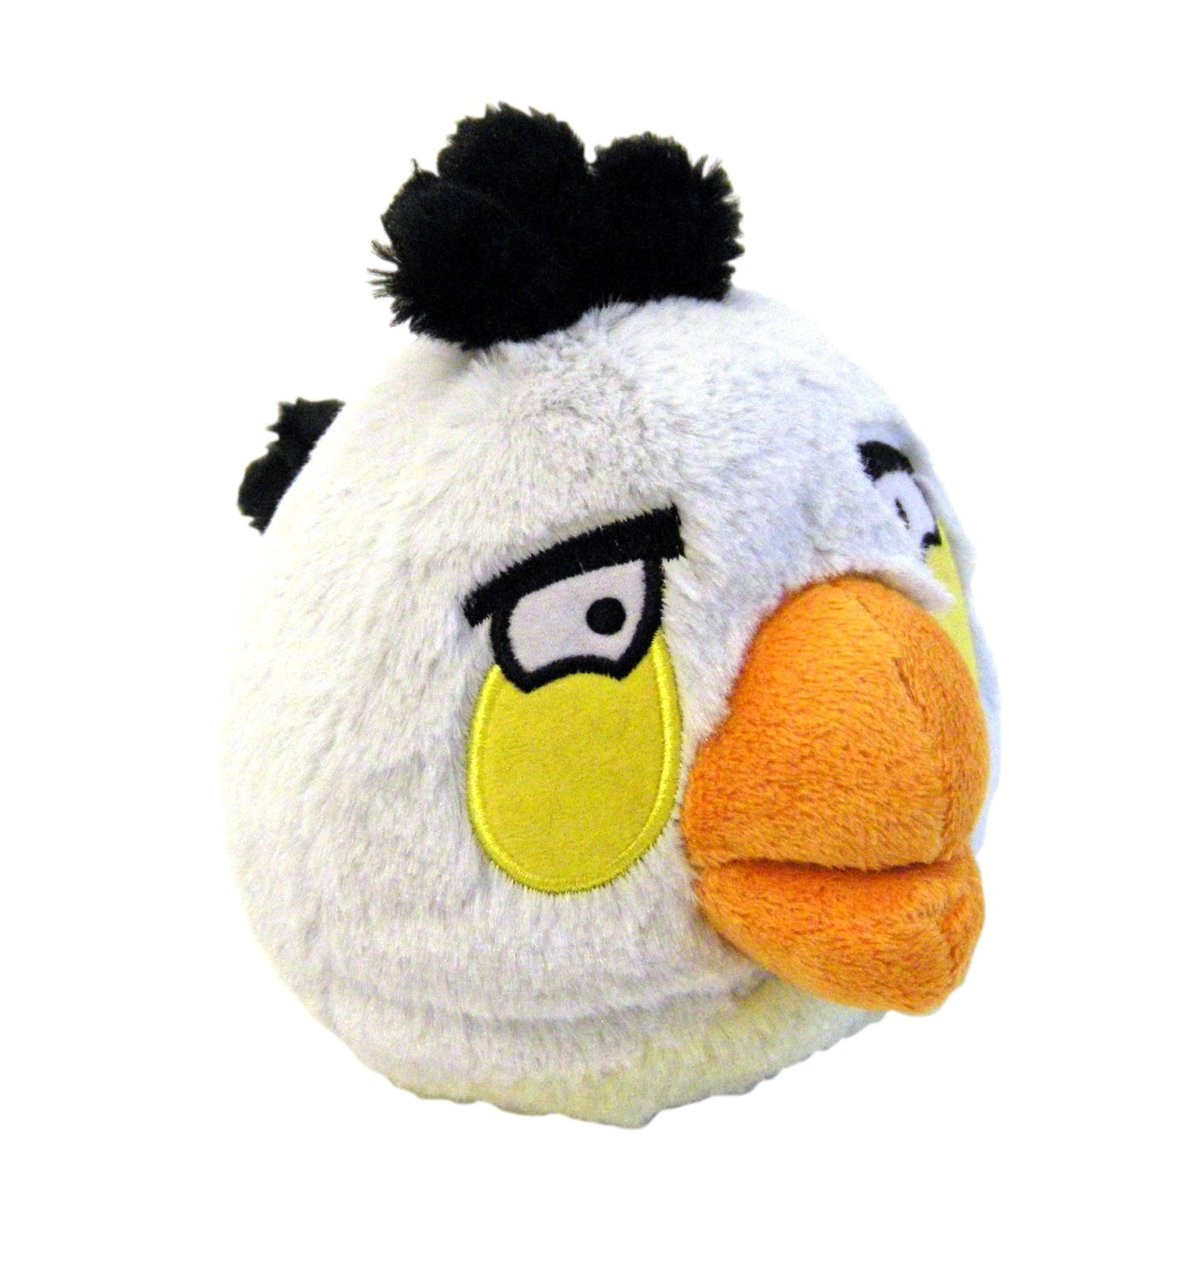 Angry Birds Plush 5-Inch White Bird with Sound - For Moms